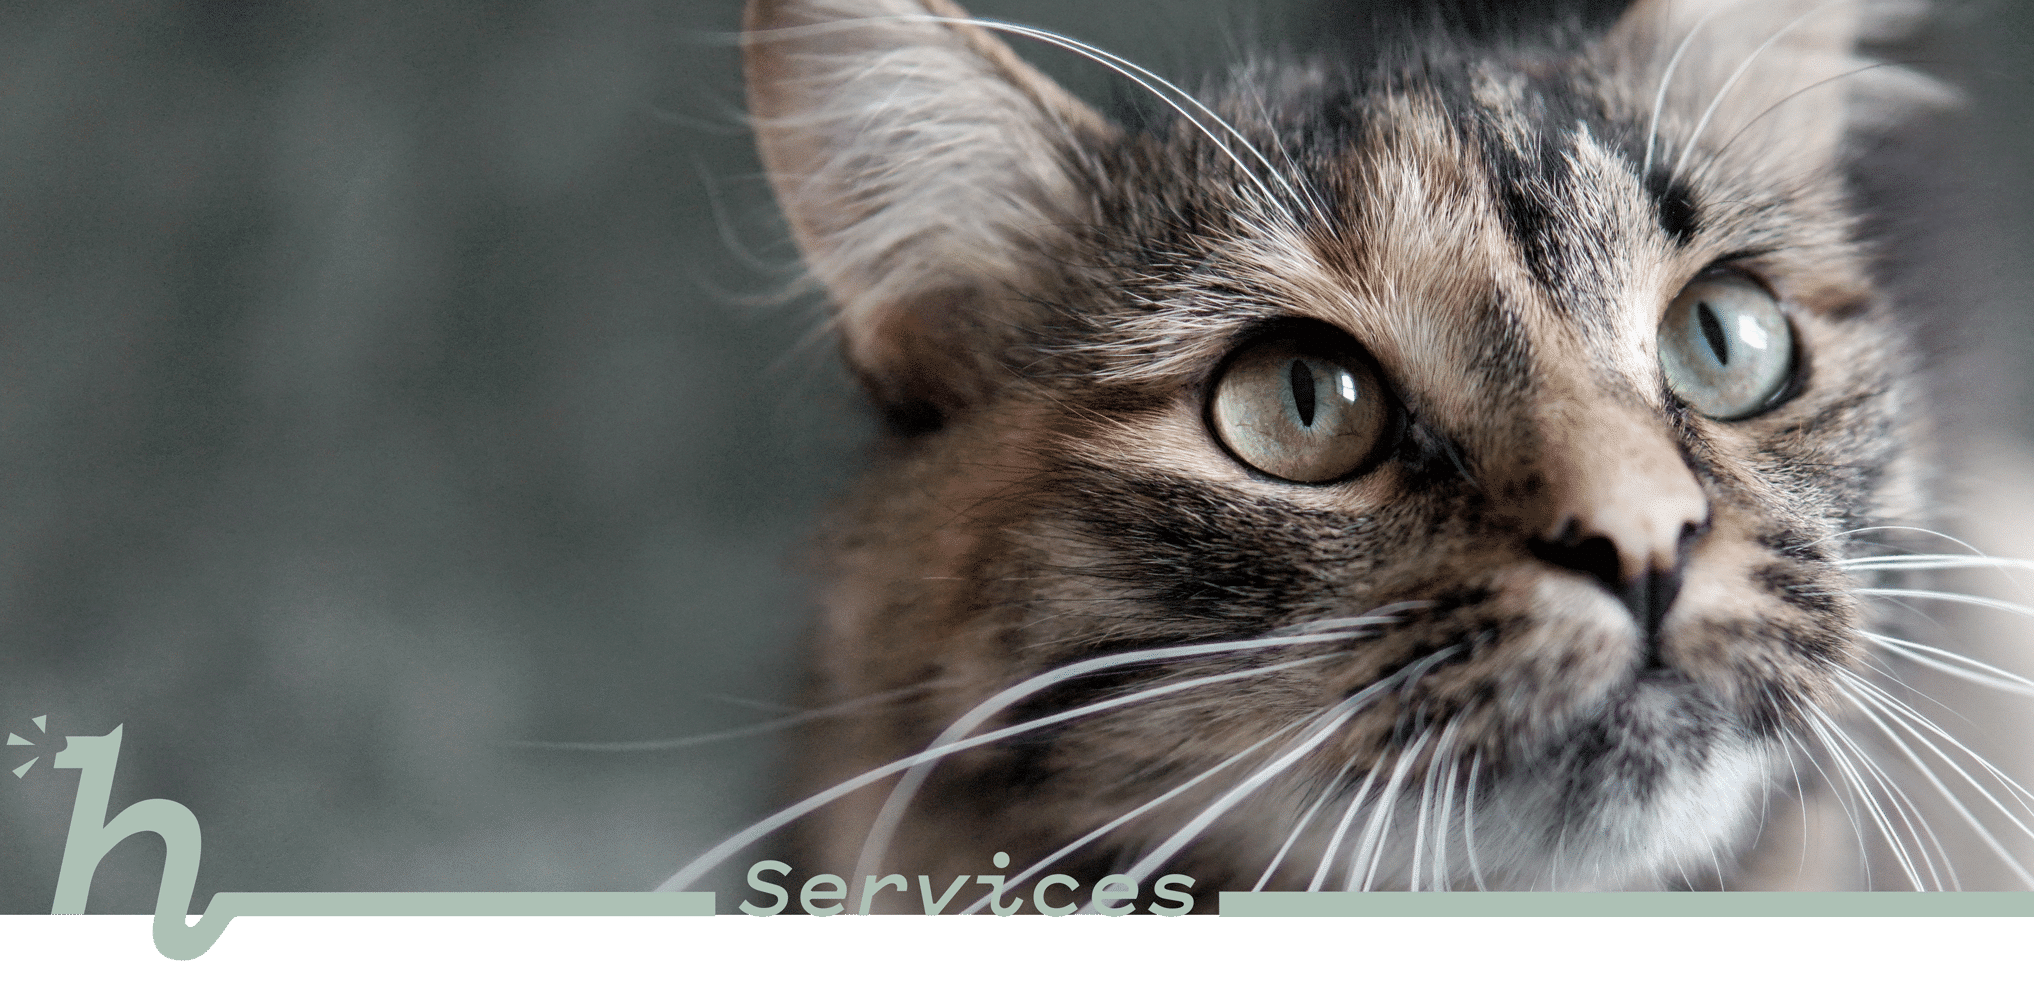 A close up of a tabby cat with green/ gray eyes with the text, "Services" for Honna's Veterinary